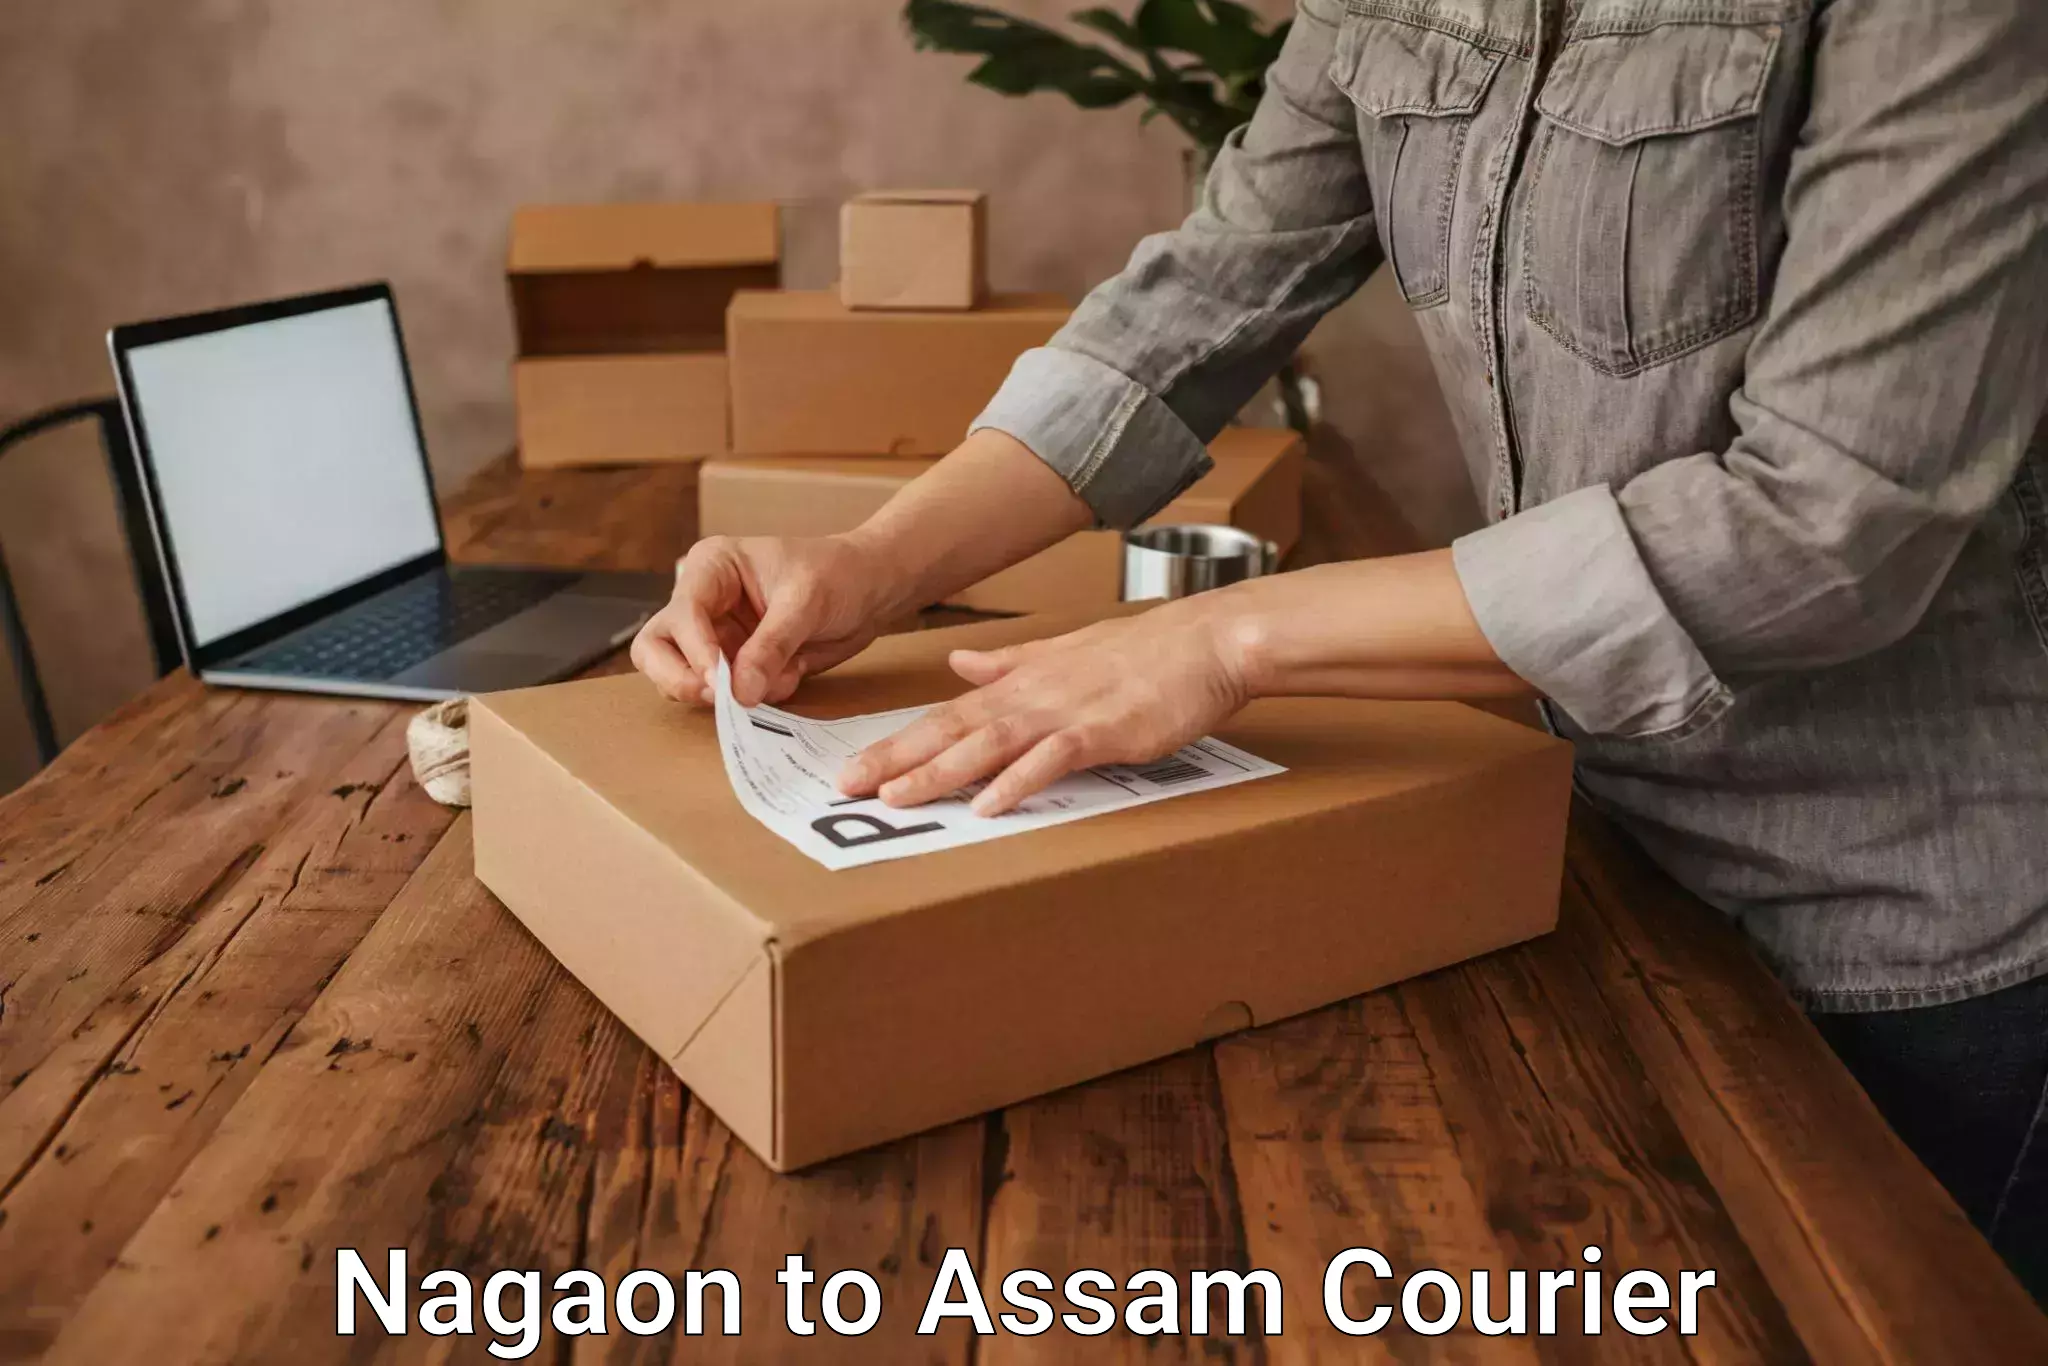 24/7 courier service Nagaon to Cachar